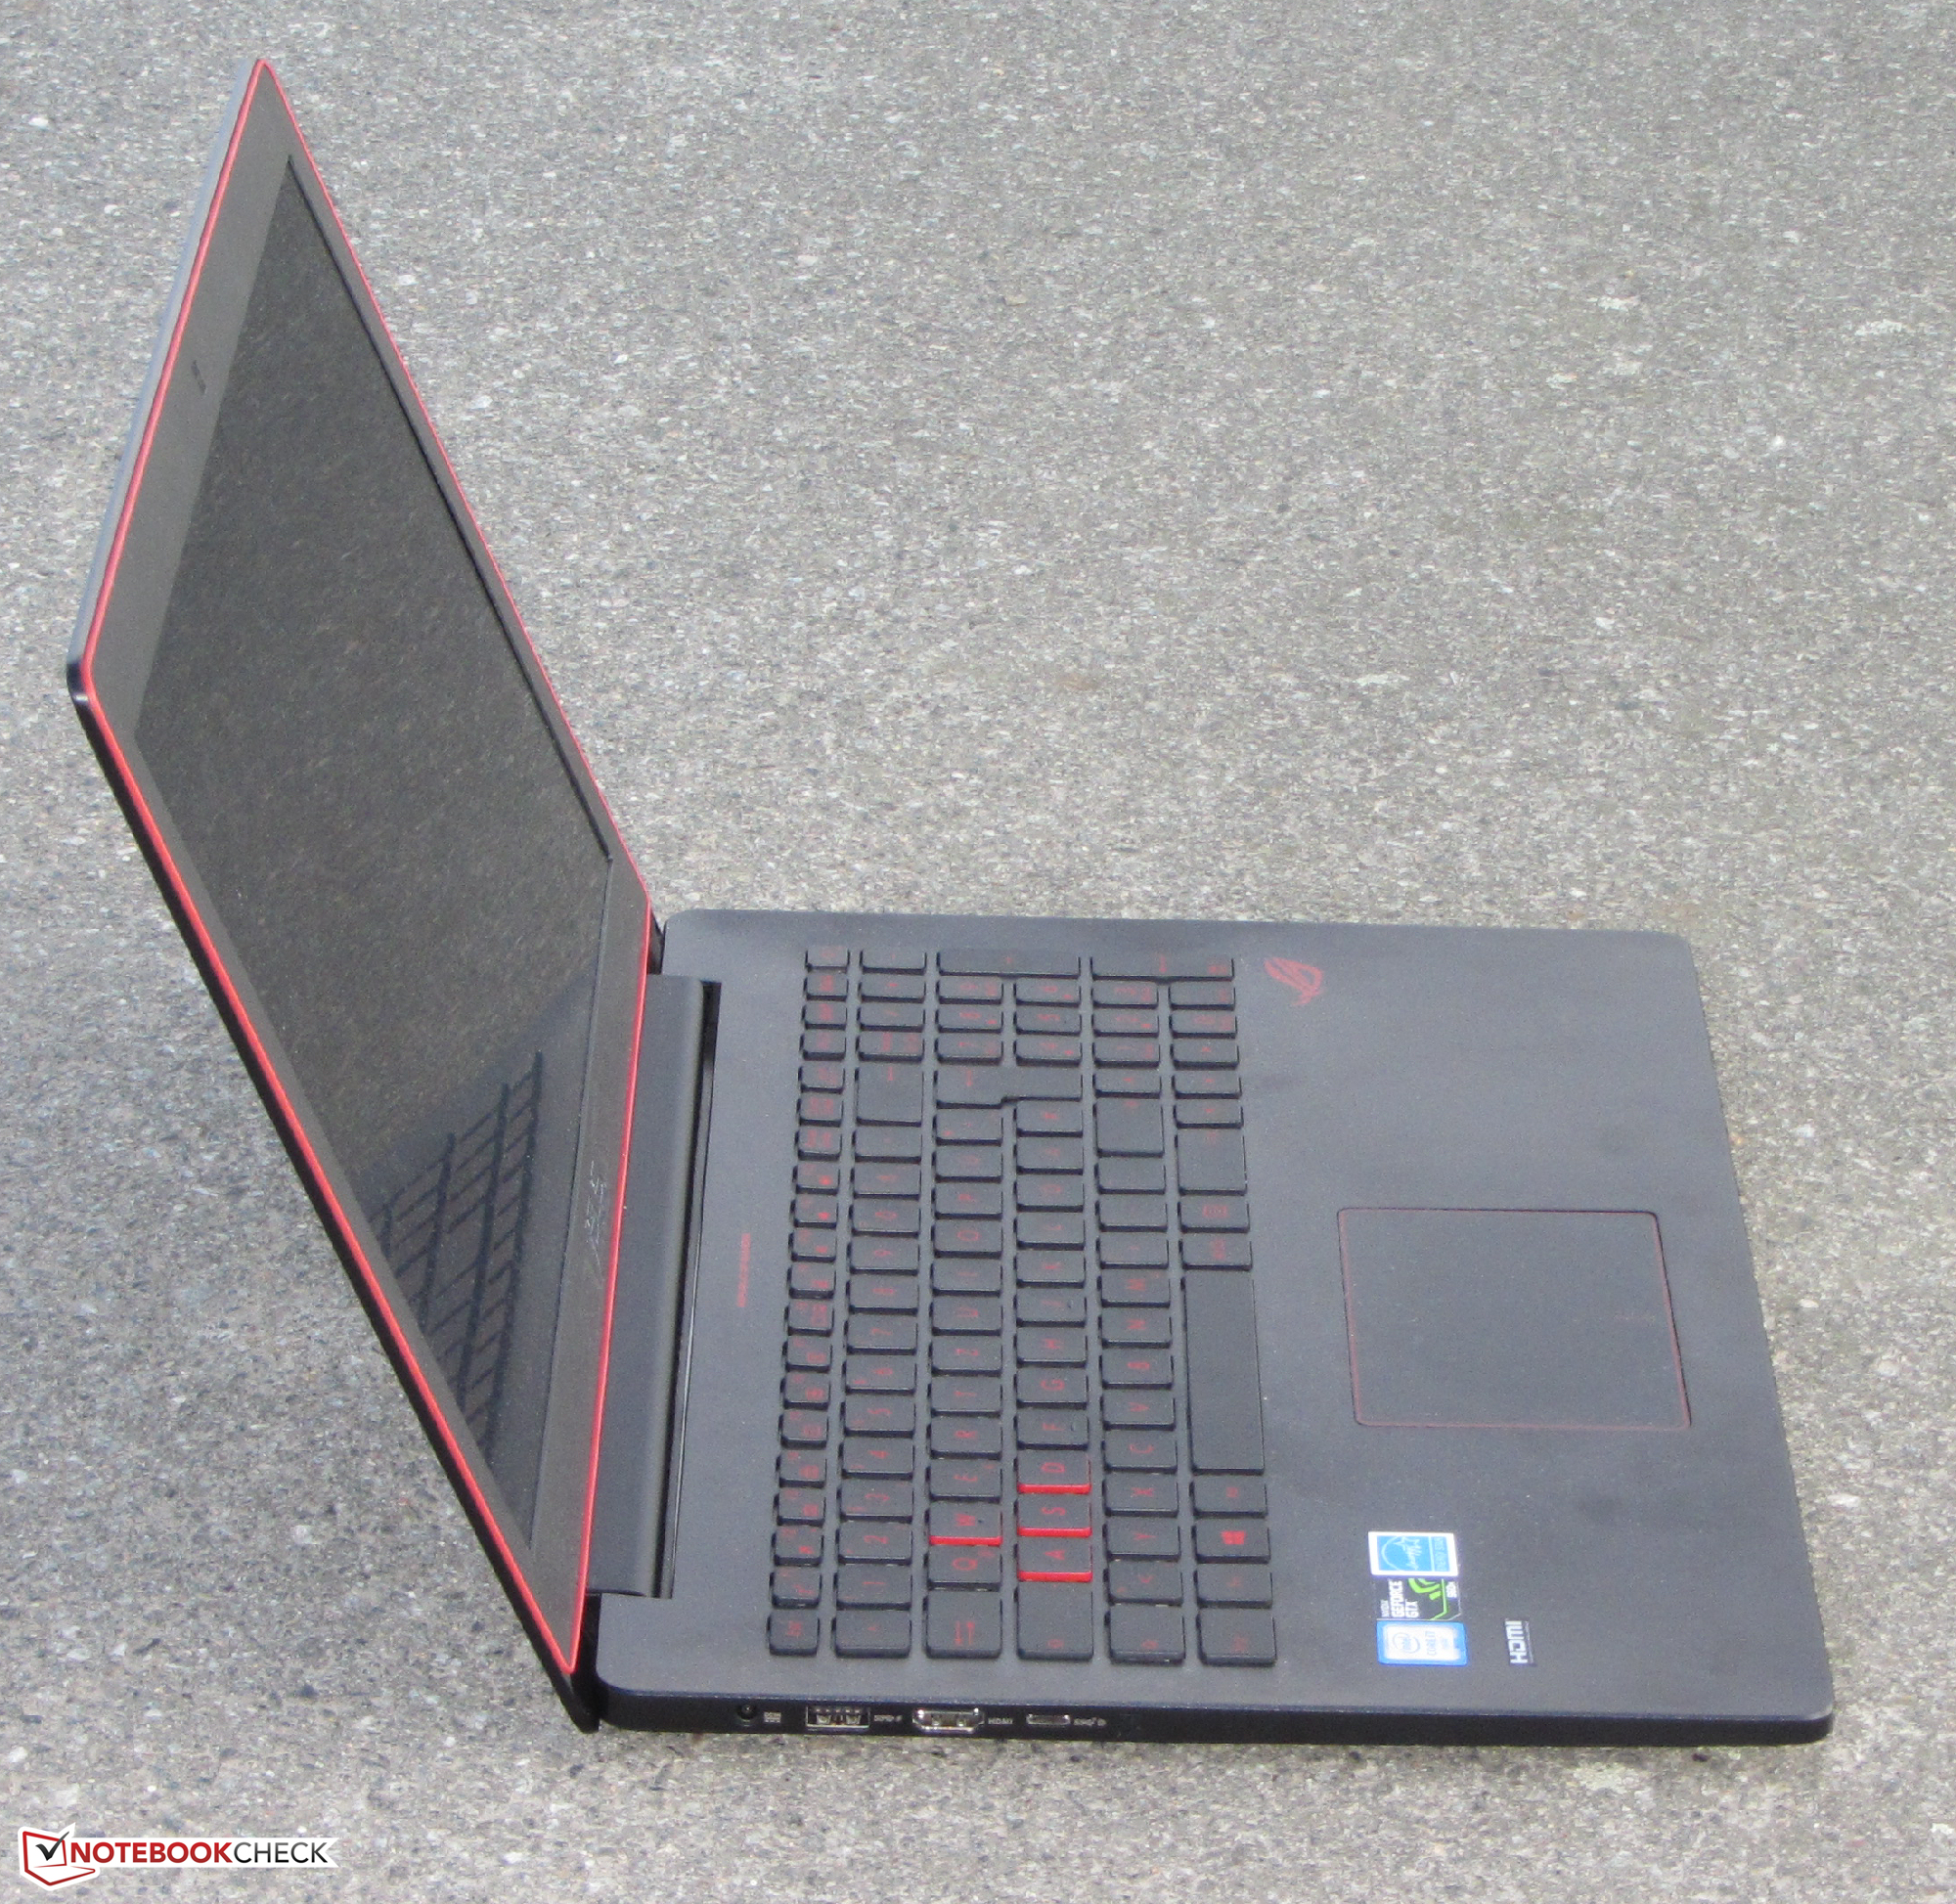 Asus G501VW-FY081T Notebook Review - NotebookCheck.net Reviews